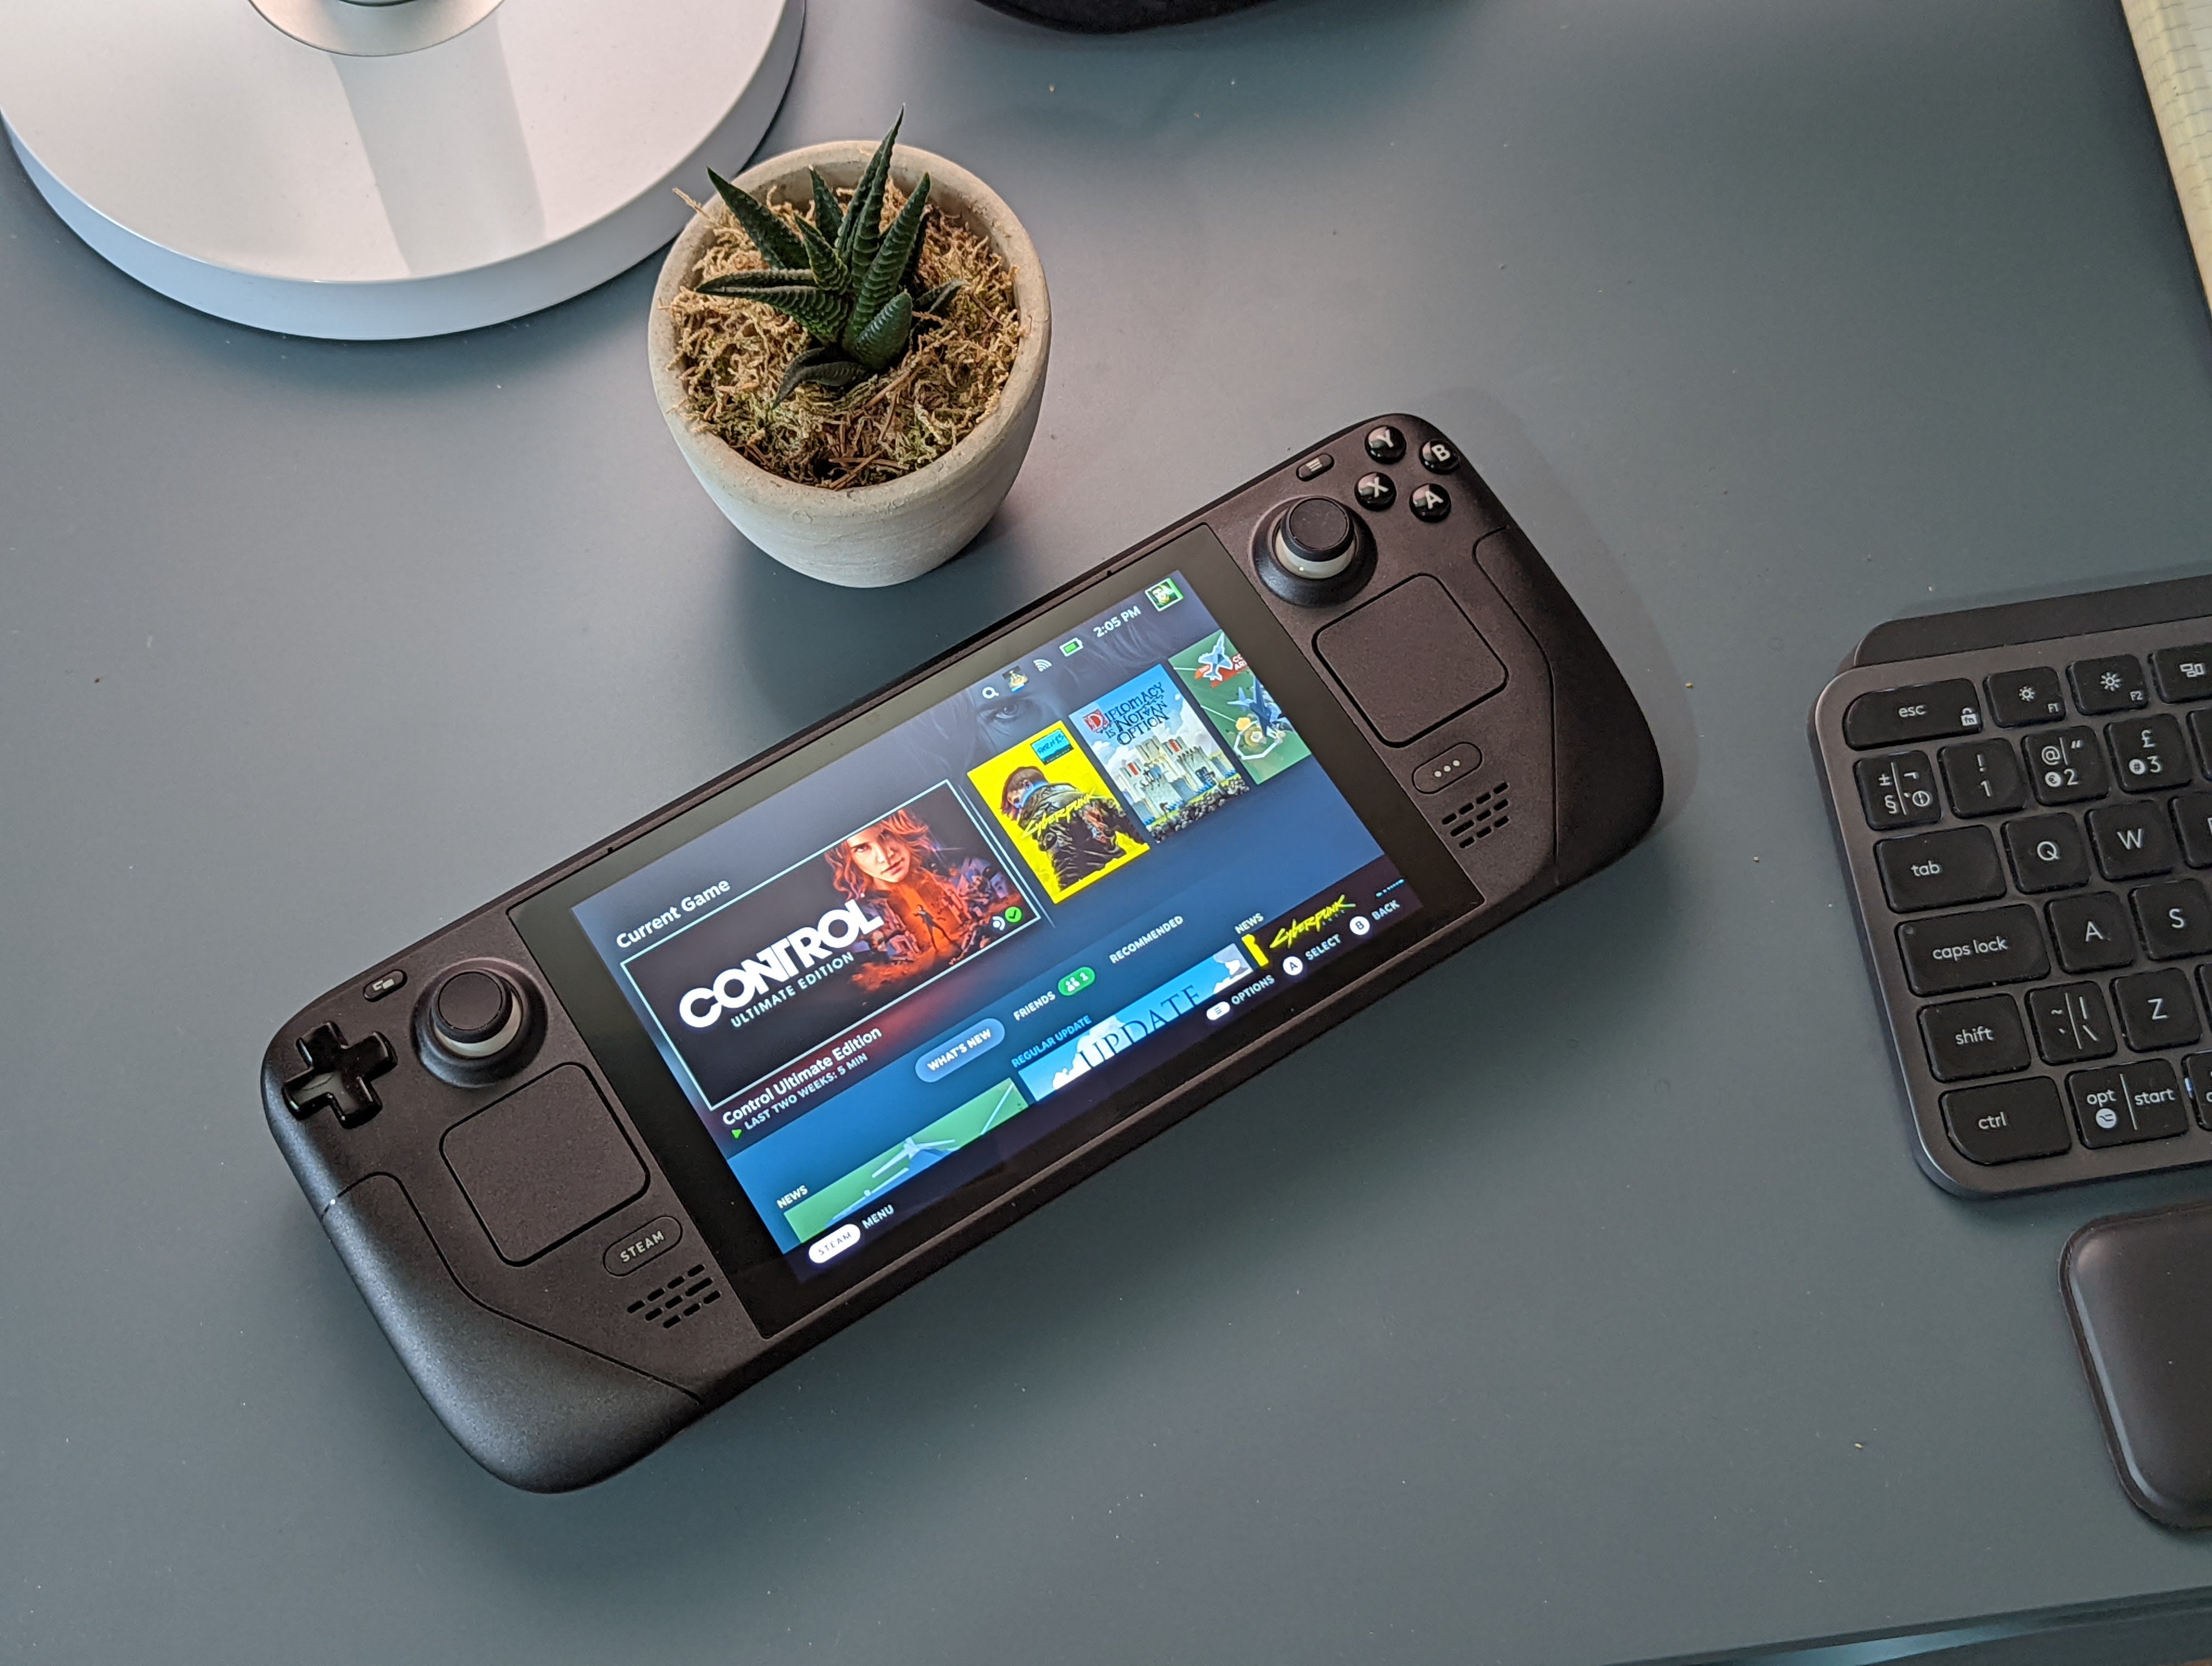 We put a variety of games through their paces on the handheld device